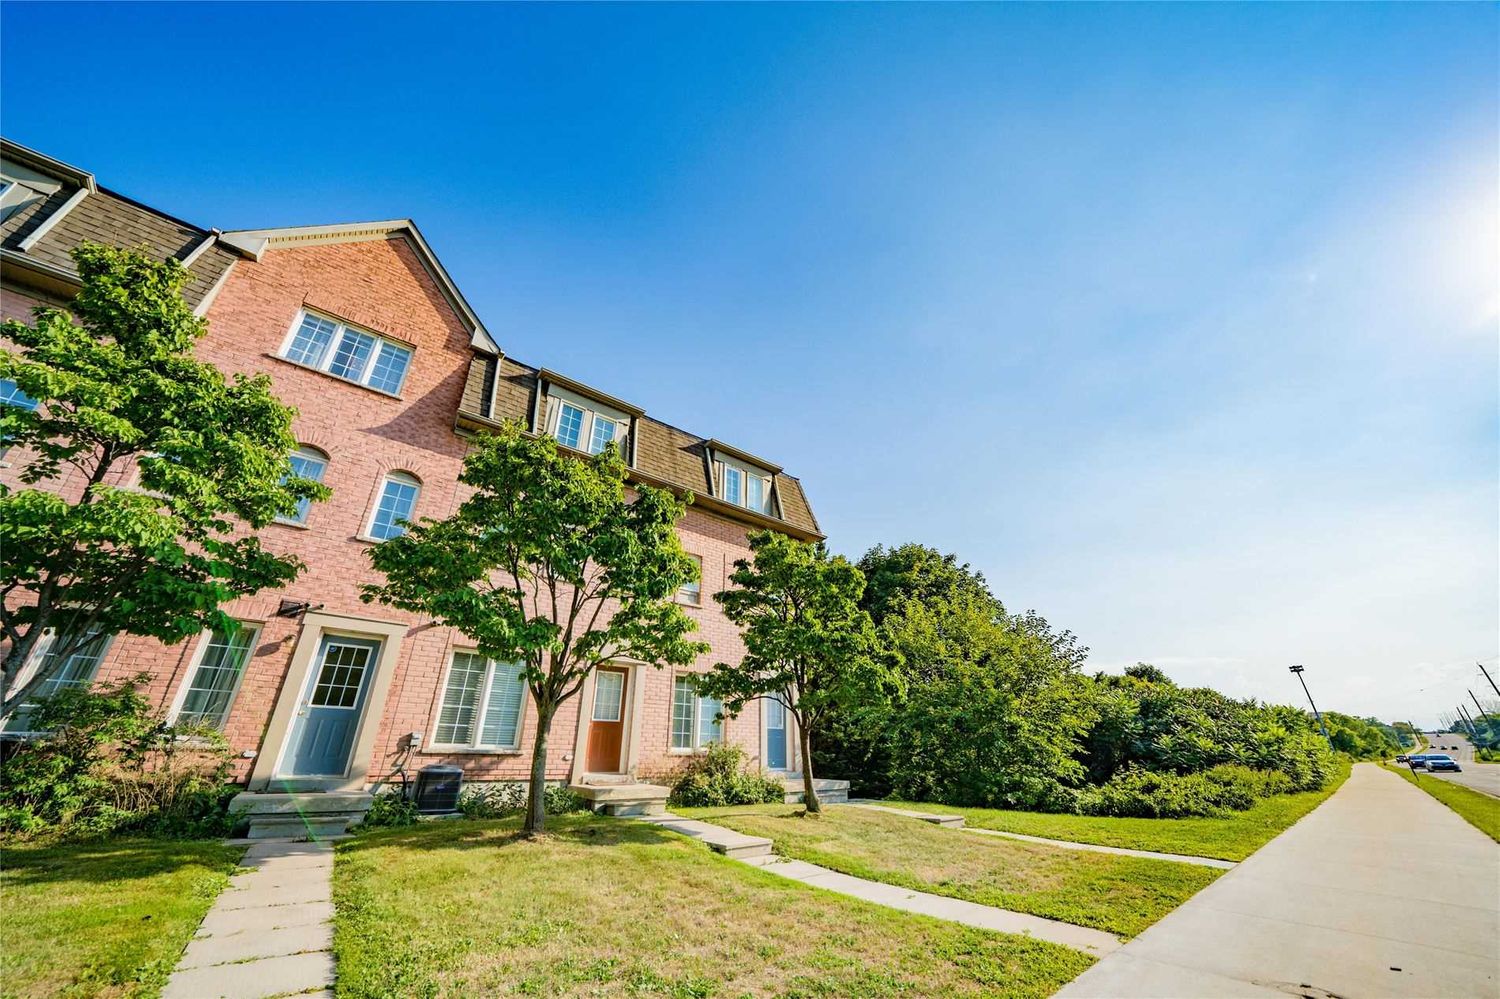 1100 Begley Street. Canoe Landing Townhomes is located in  Pickering, Toronto - image #2 of 2